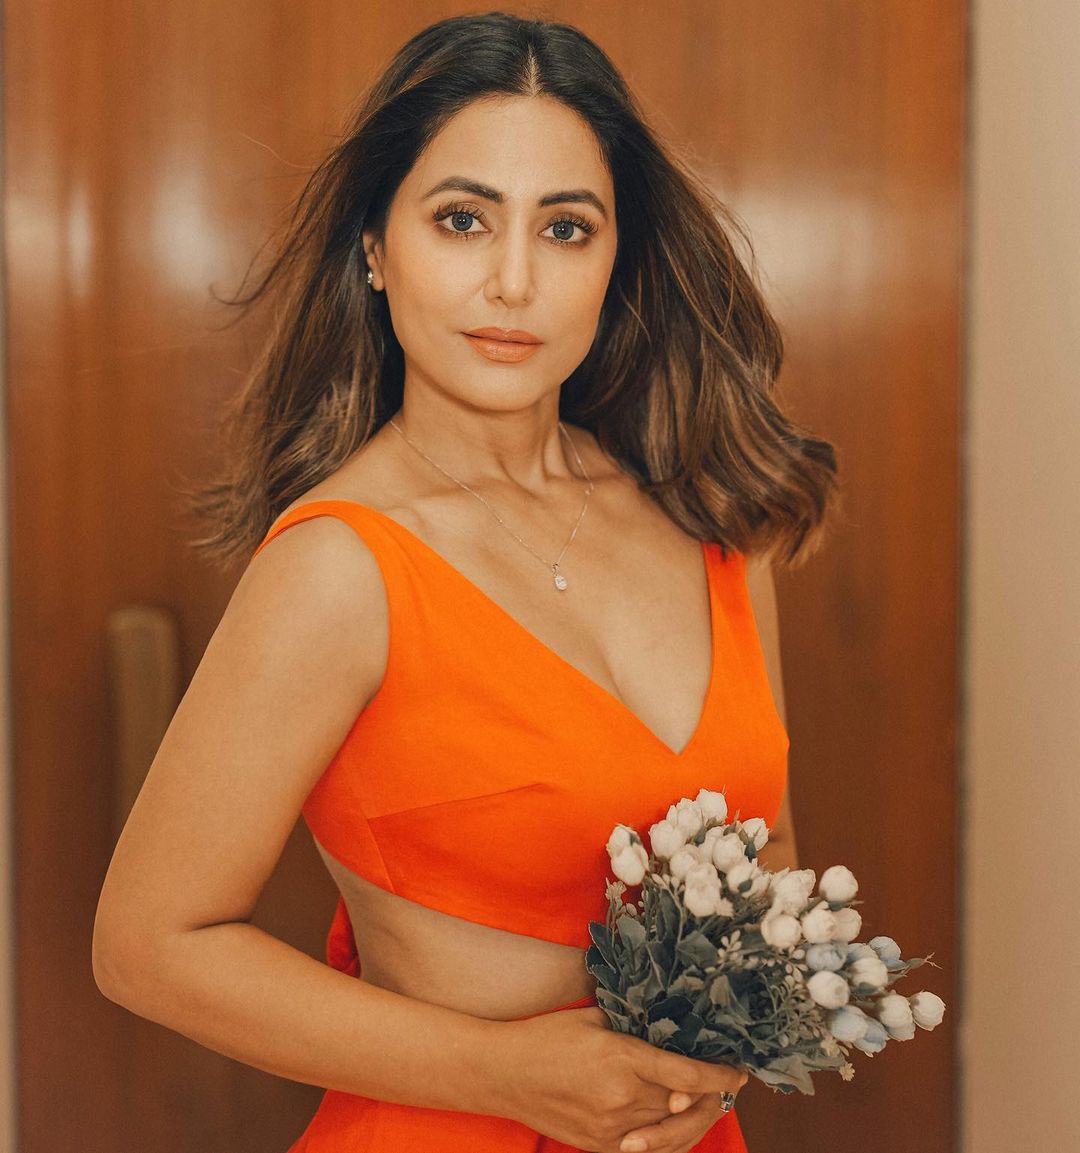 Hina Khan in orange dress holding flowers and posing for camera - Most beautiful Indian Girls